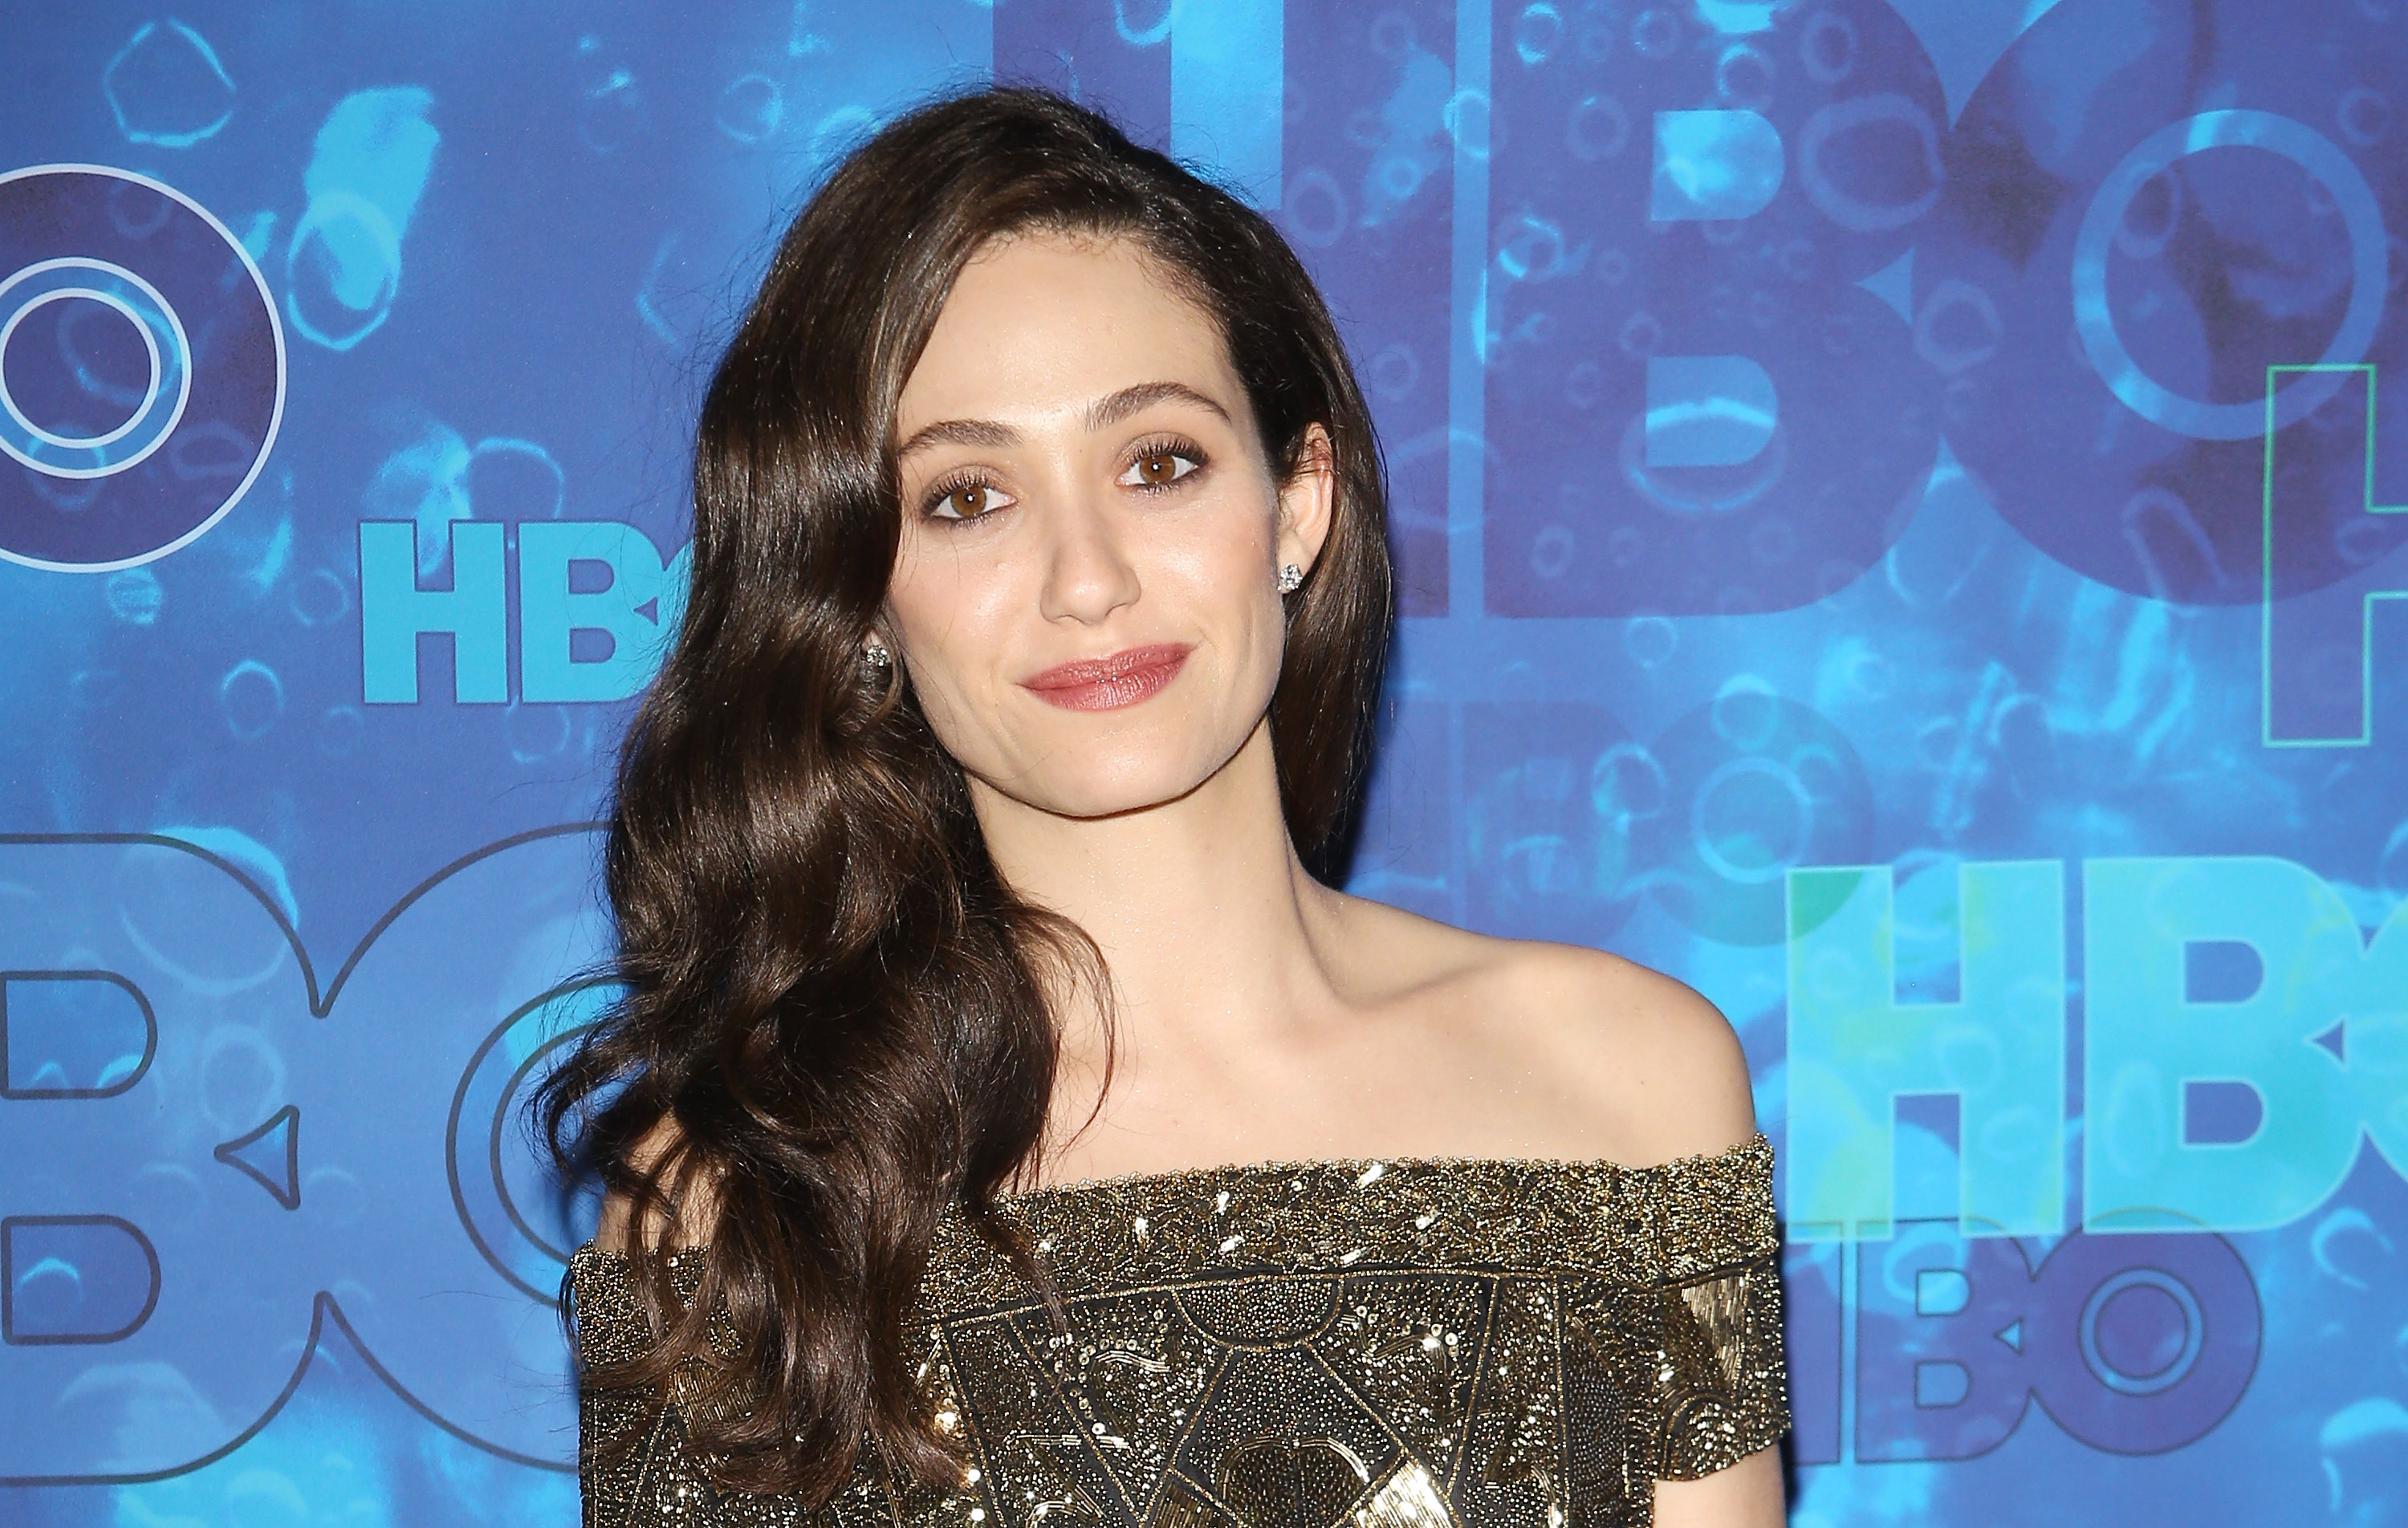 LOS ANGELES, CA - SEPTEMBER 18:  Emmy Rossum arrives at HBO's Post Emmy Awards reception held at The Plaza at the Pacific Design Center on September 18, 2016 in Los Angeles, California.  (Photo by Michael Tran/FilmMagic) (Michael Tran&mdash;FilmMagic/Getty Images)